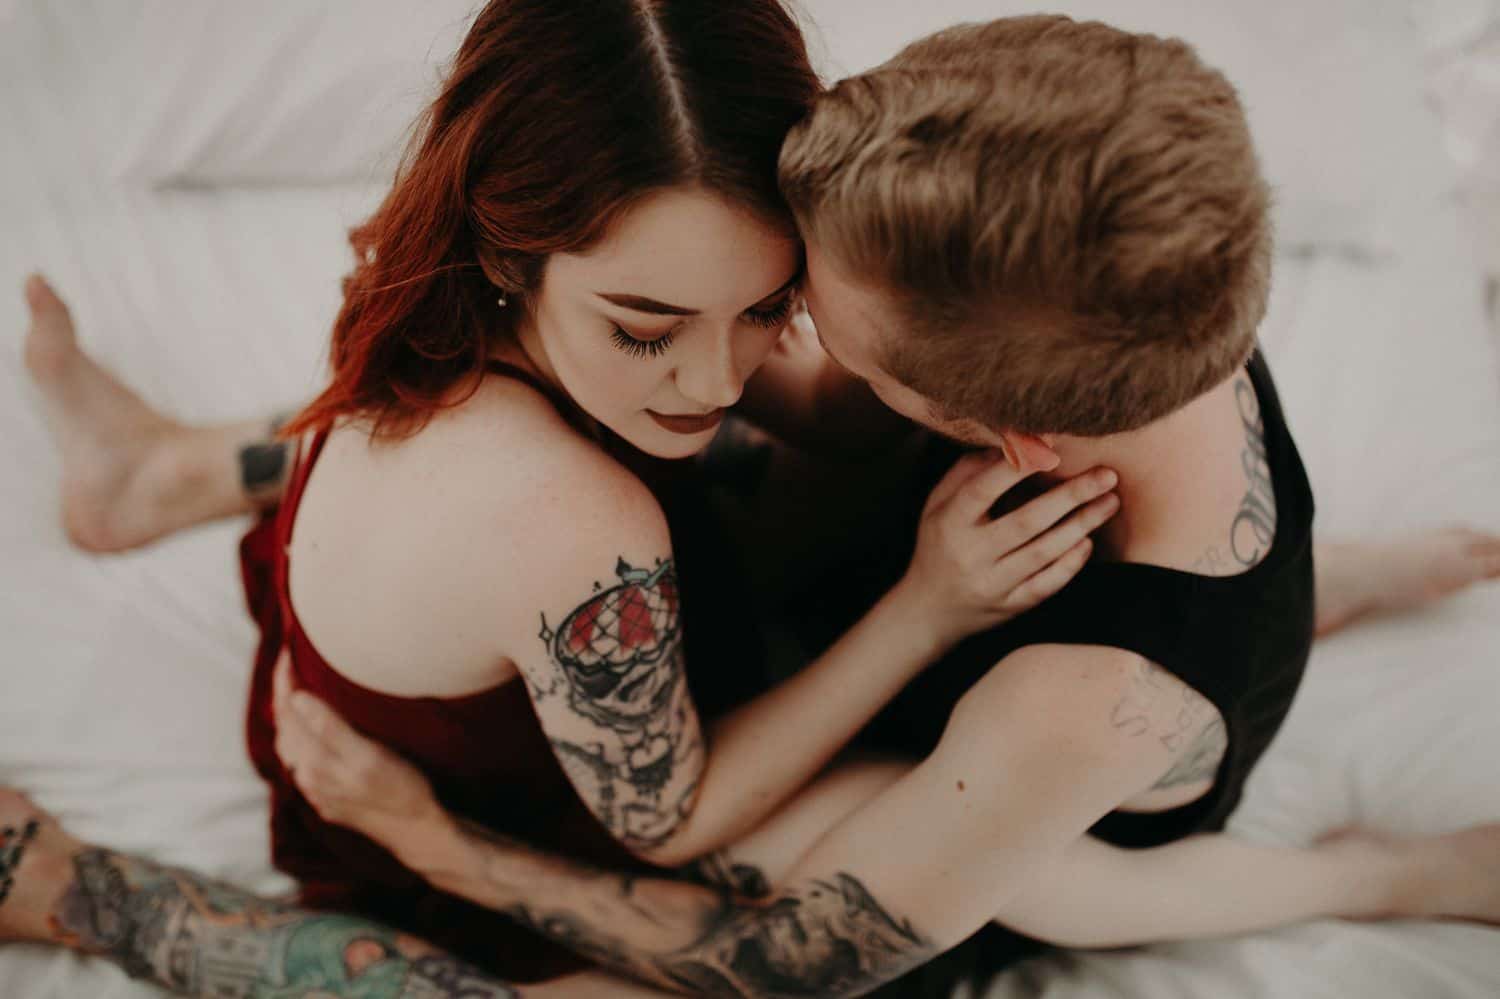 This Is the Boudoir Photography Shy Couples Need To See: Tattooed Couple Sits Close On Bed